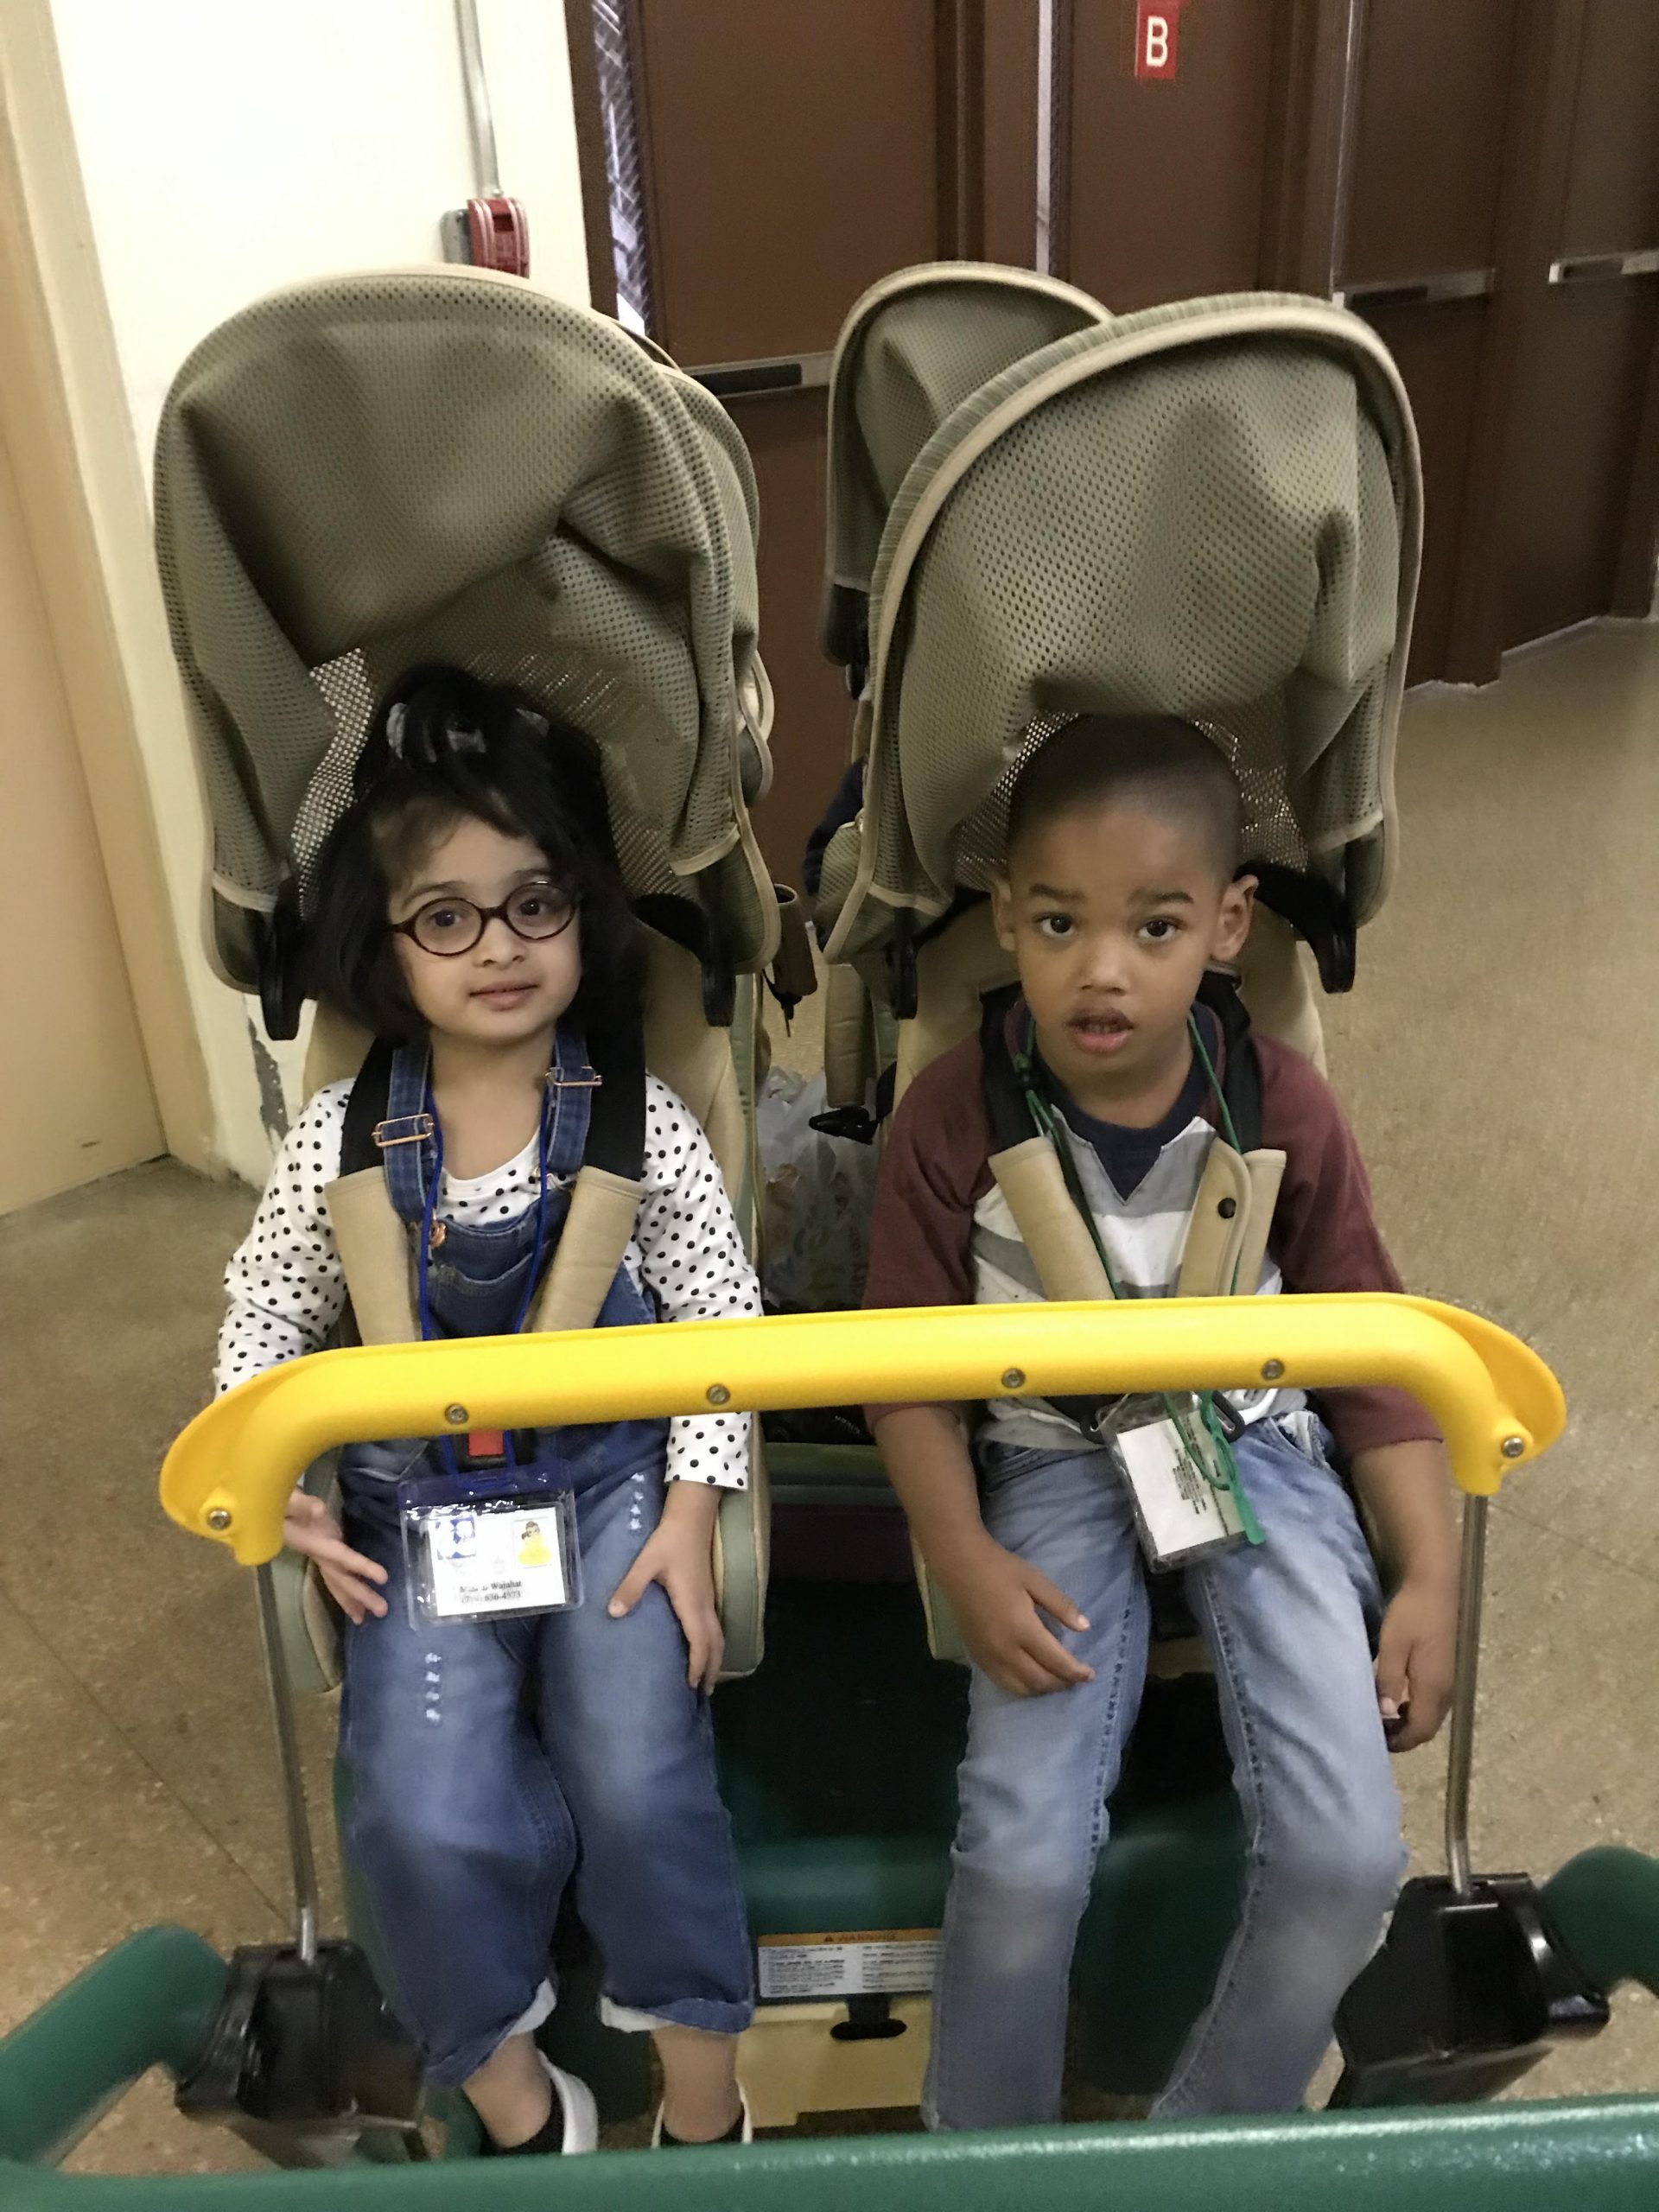 Two preschool students (1 boy and 1 girl) are sitting buckled into a 4 -person buggy stroller hallway right by exit doors. The students are wearing their school IDs around their necks. The female student is wearing eyeglasses, blue denim overalls, top with long sleeves and black dots. The male student is wearing a top with long sleeve style sports sweatshirt and bottom denim jeans.